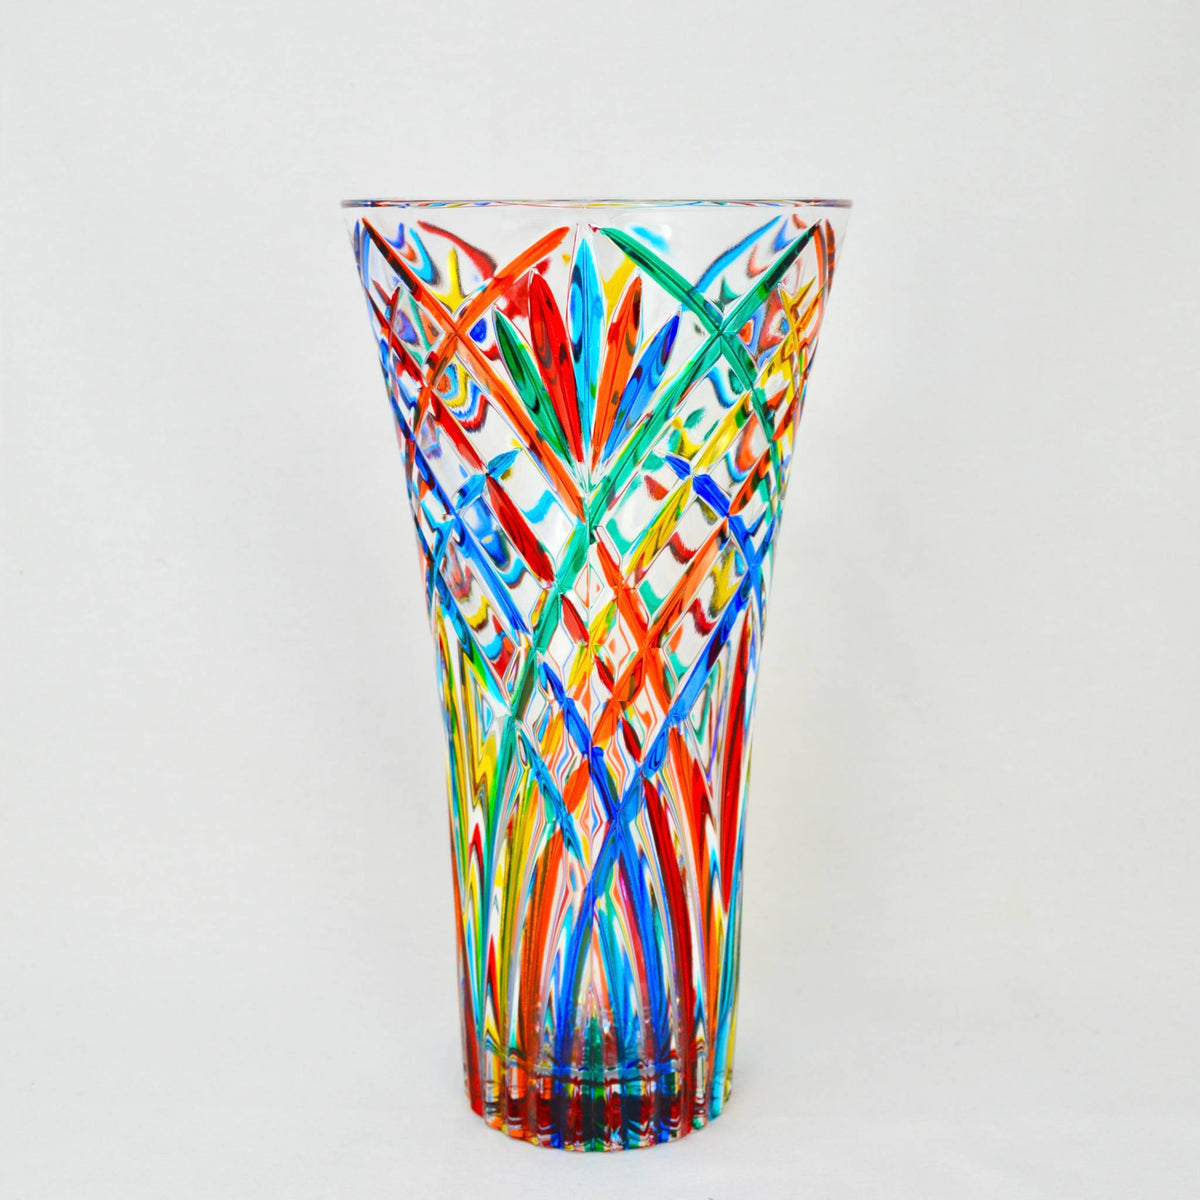 Melodia Luxury Vase, Hand Painted Crystal, Made in Italy - My Italian Decor